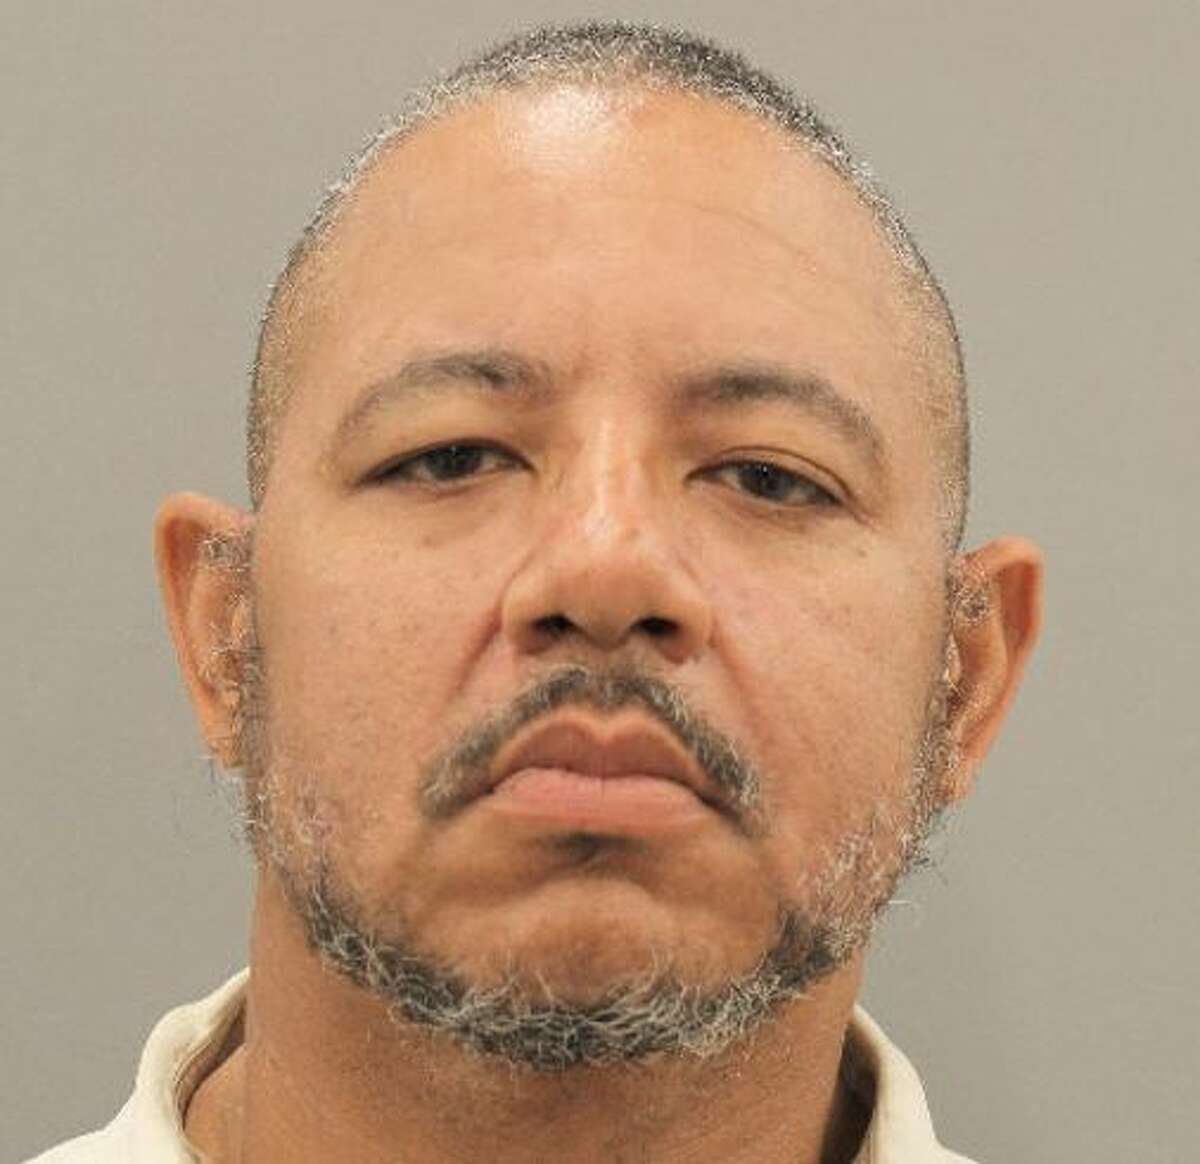 Police Houston man killed, dismembered wife days after detectives interviewed him about sex abuse claim pic